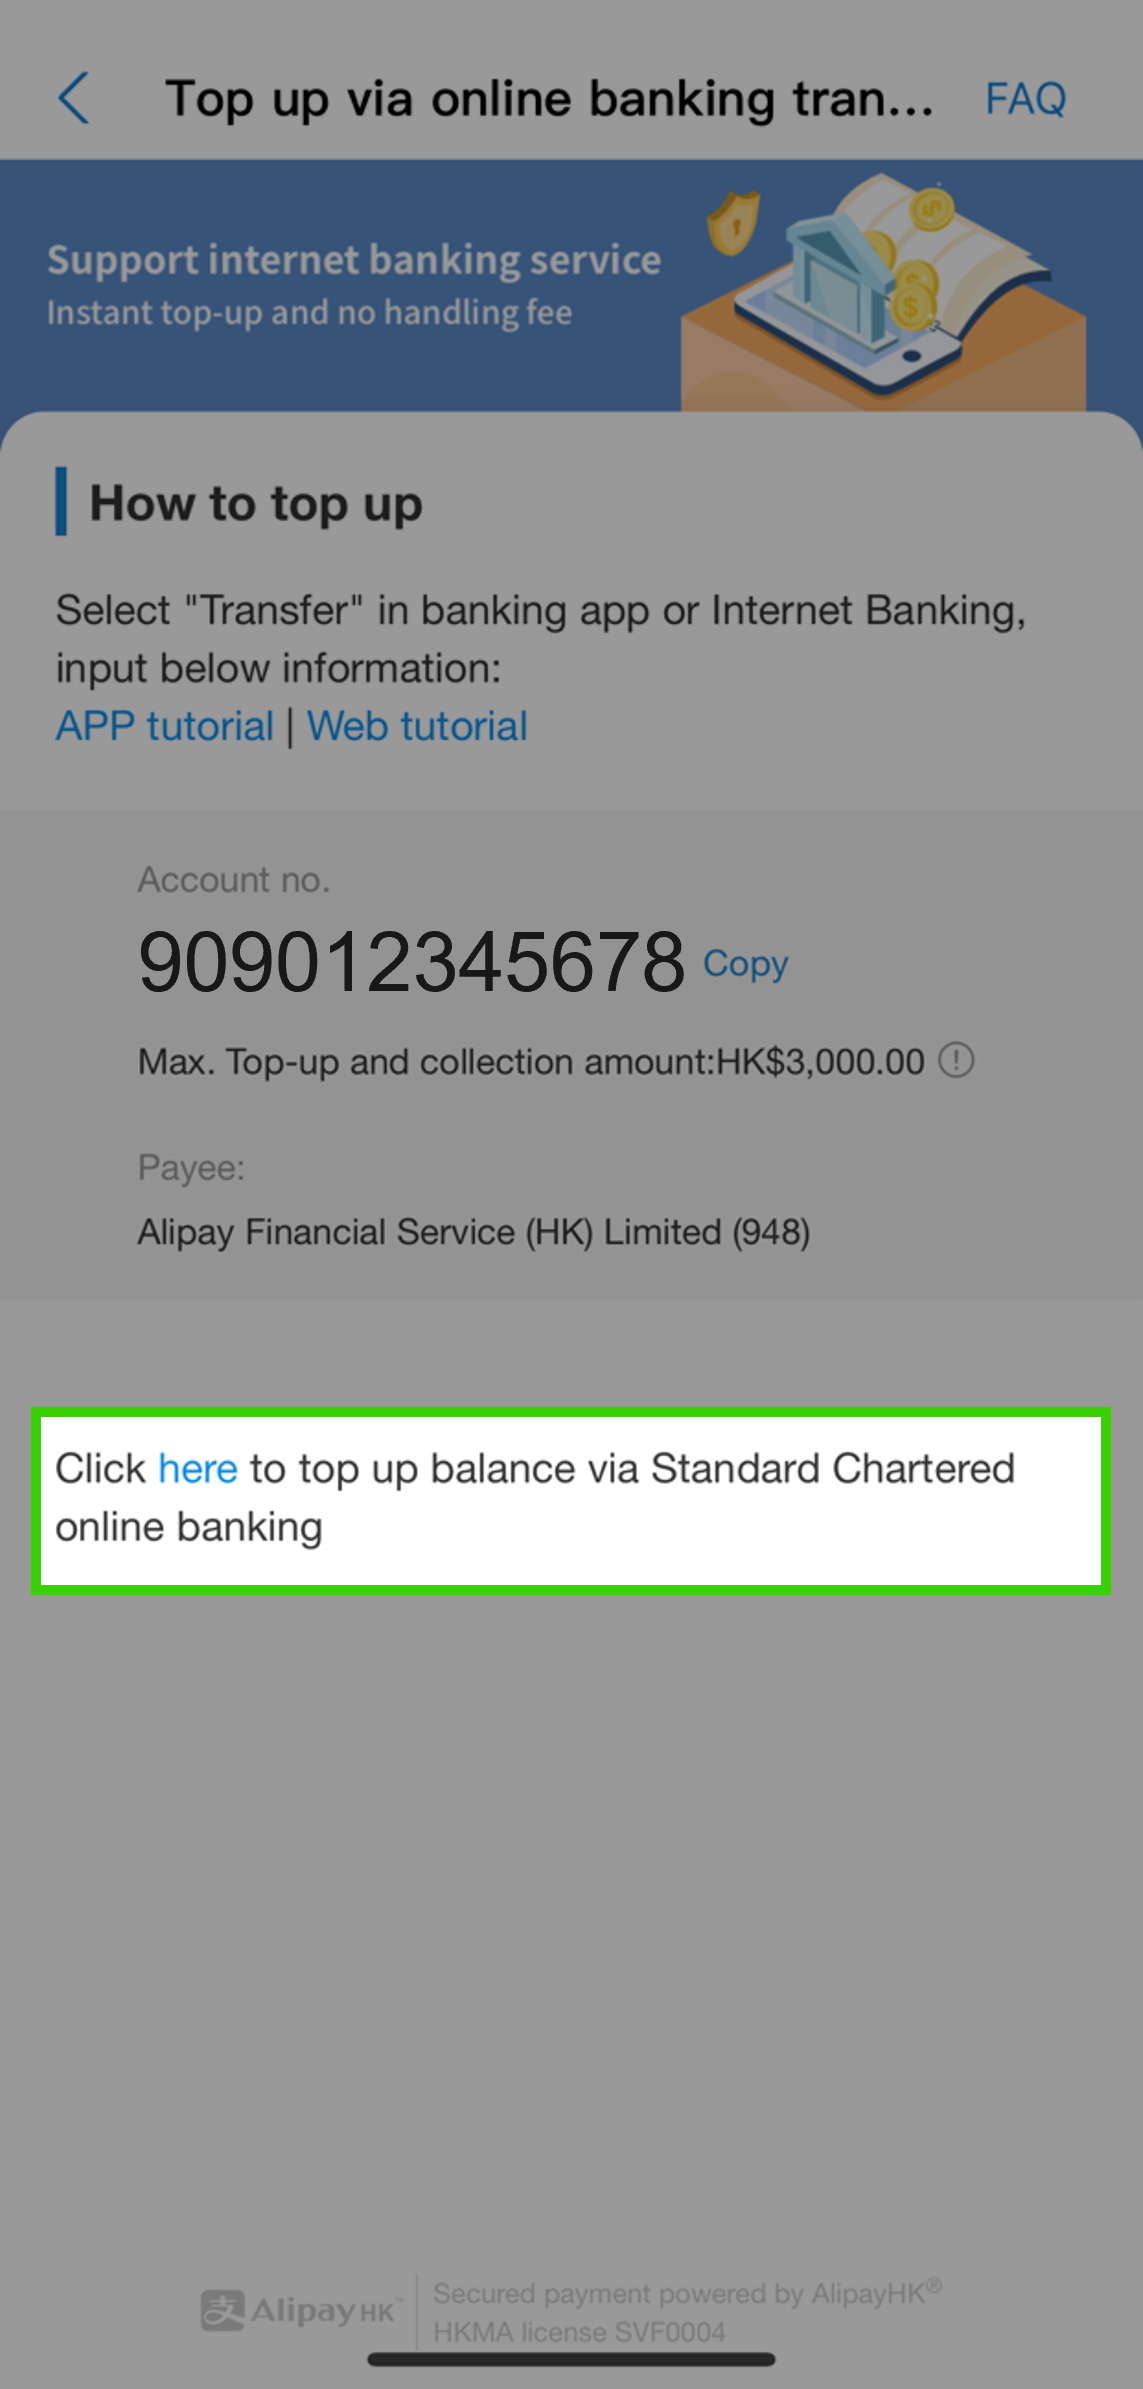 Click the section of Standard Chartered online banking to retrieve top up ID